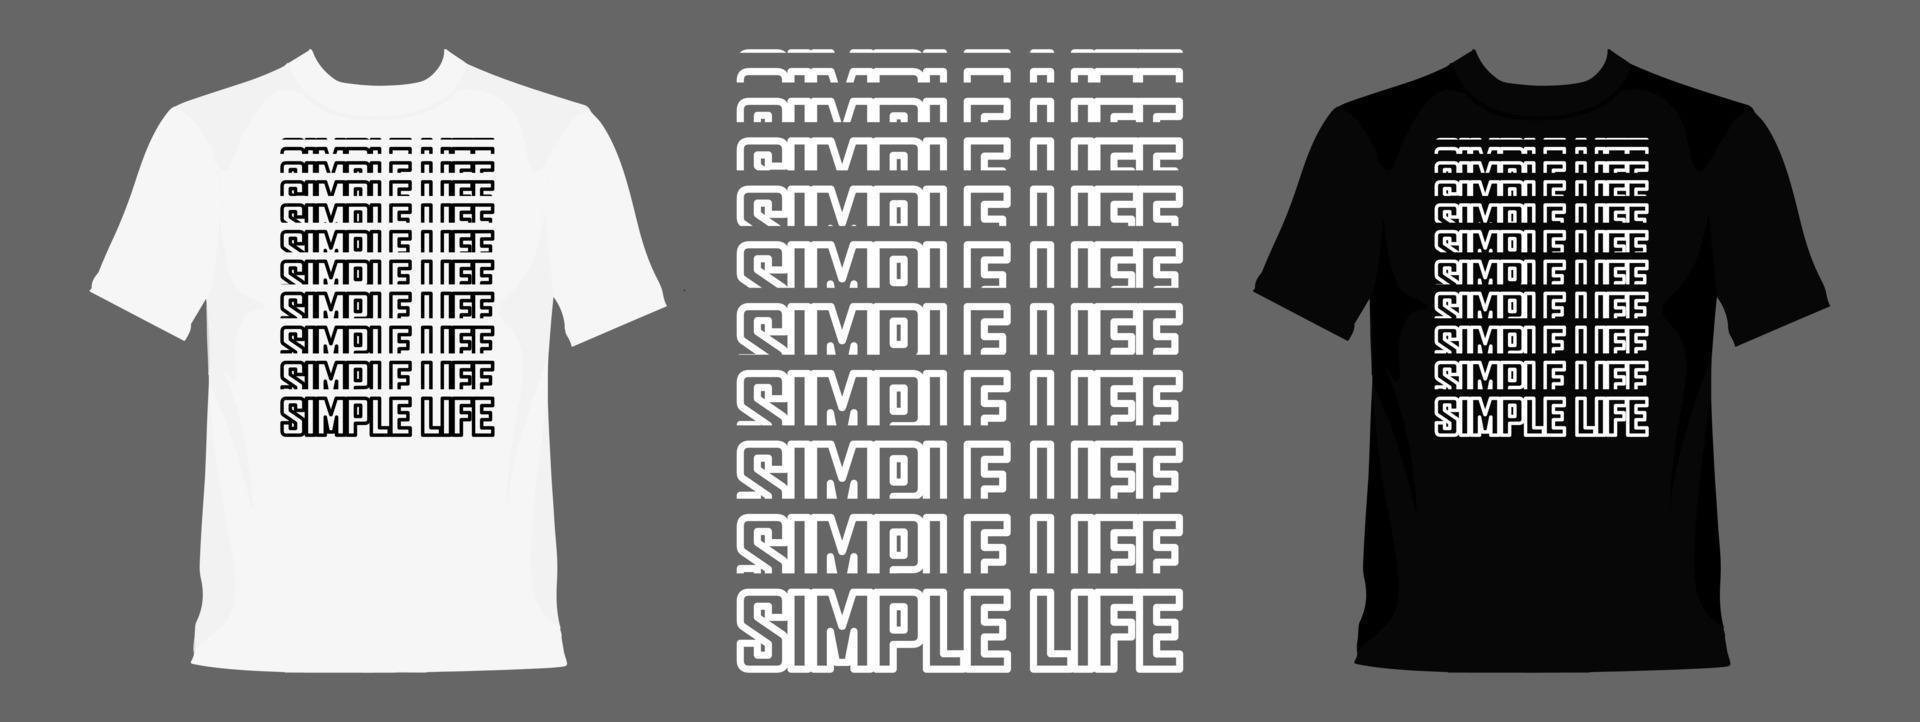 Simple Life trendy typography lettering design template for print t shirt fashion clothing and poster vector